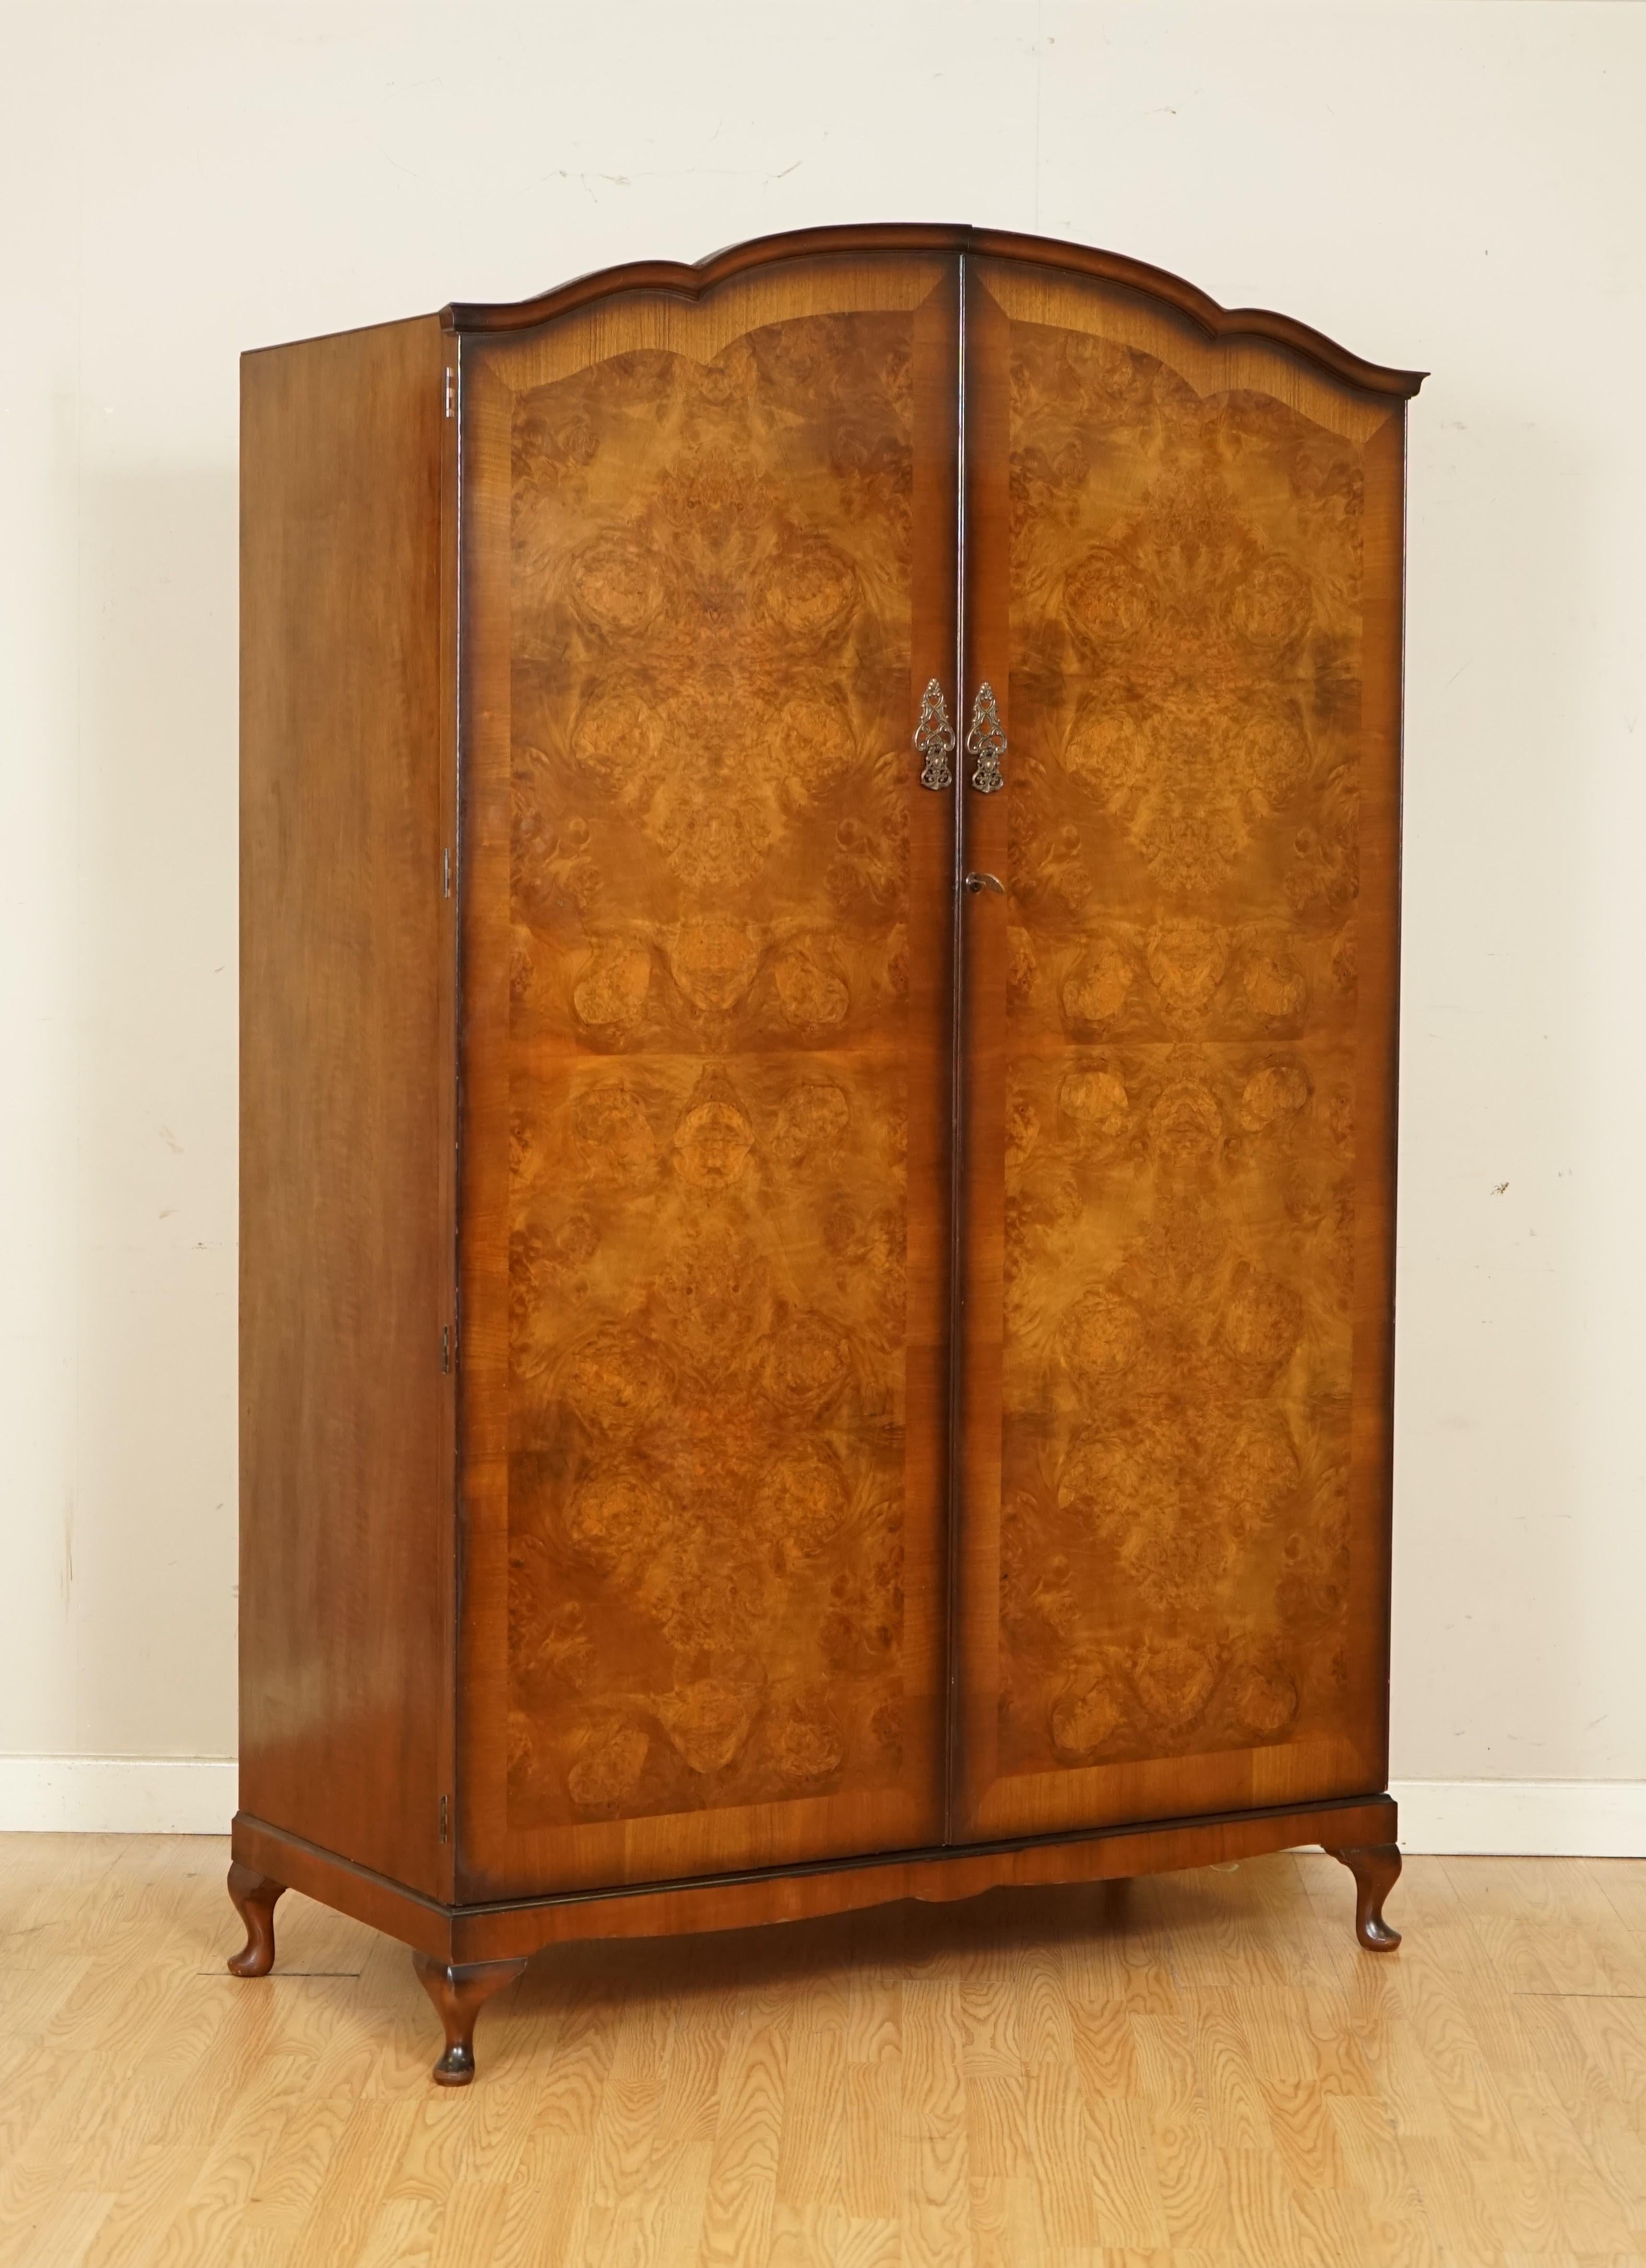 We are so excited to present to you this Art Deco burr walnut double wardrobe.

A very lovely solid and well made wardrobe, the wardrobe is in a good condition. 

Please carefully look at the pictures to see the condition before purchasing as